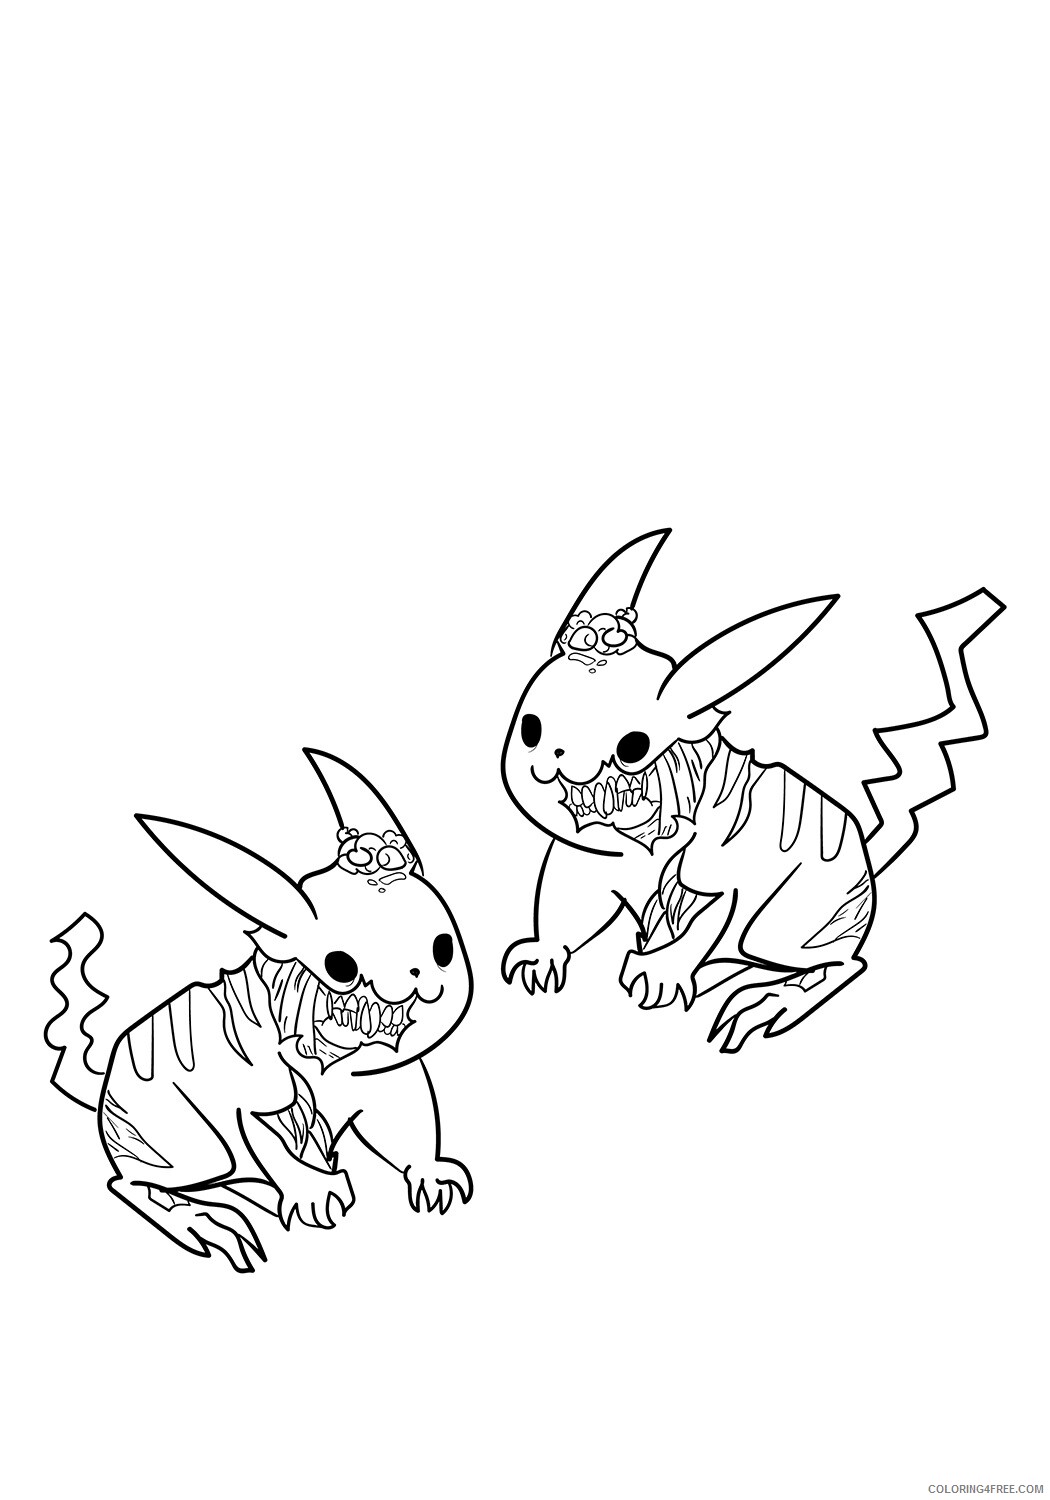 Pikachu Printable Coloring Pages Anime 1526718750_pikachu as zombie 17 a4 2021 0924 Coloring4free